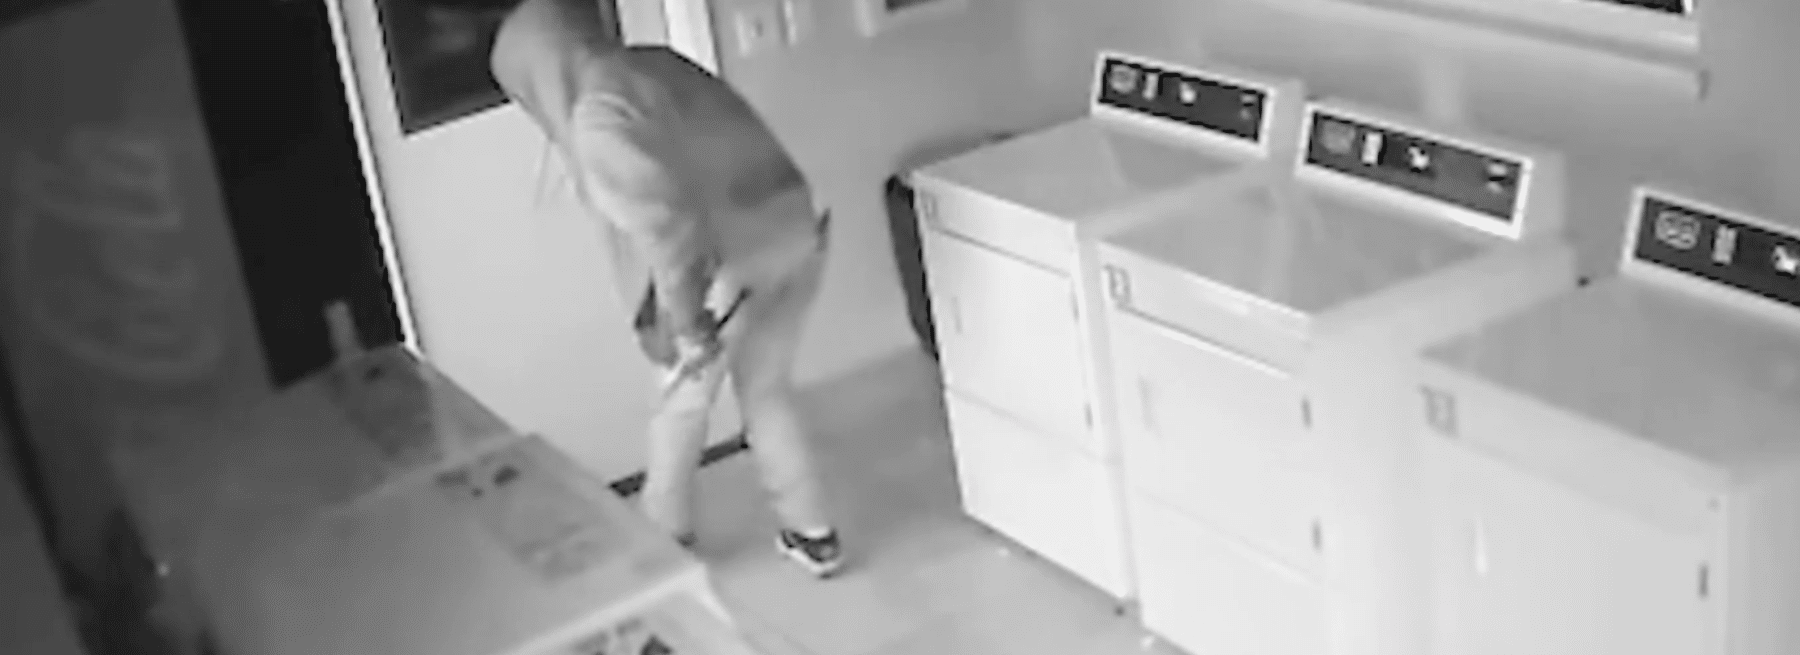 Thief With Crowbar in Apartment Laundry Room